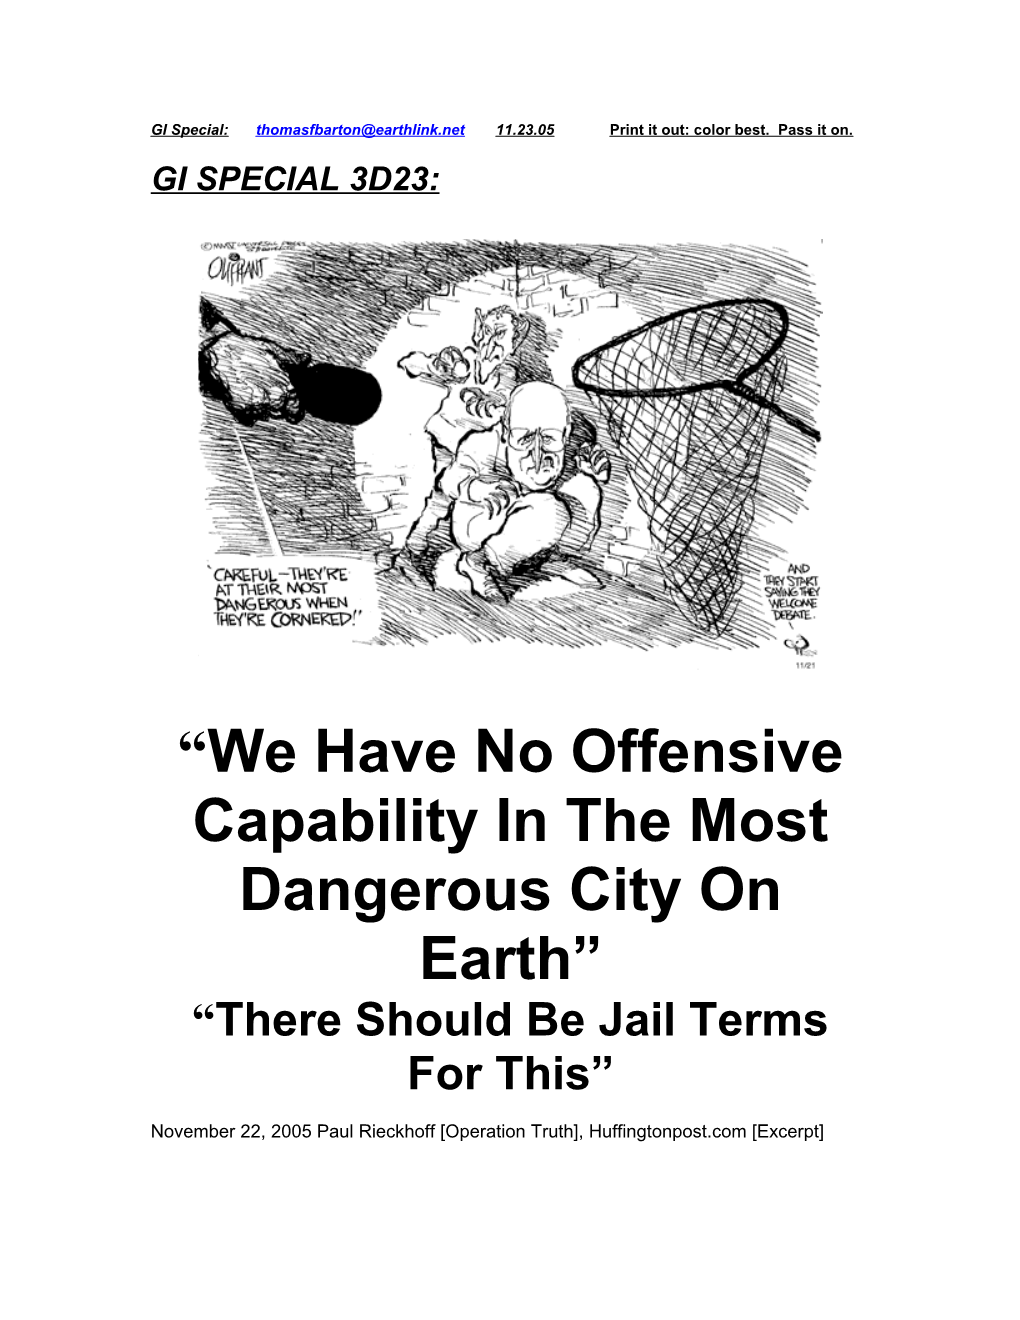 We Have No Offensive Capability in the Most Dangerous City on Earth